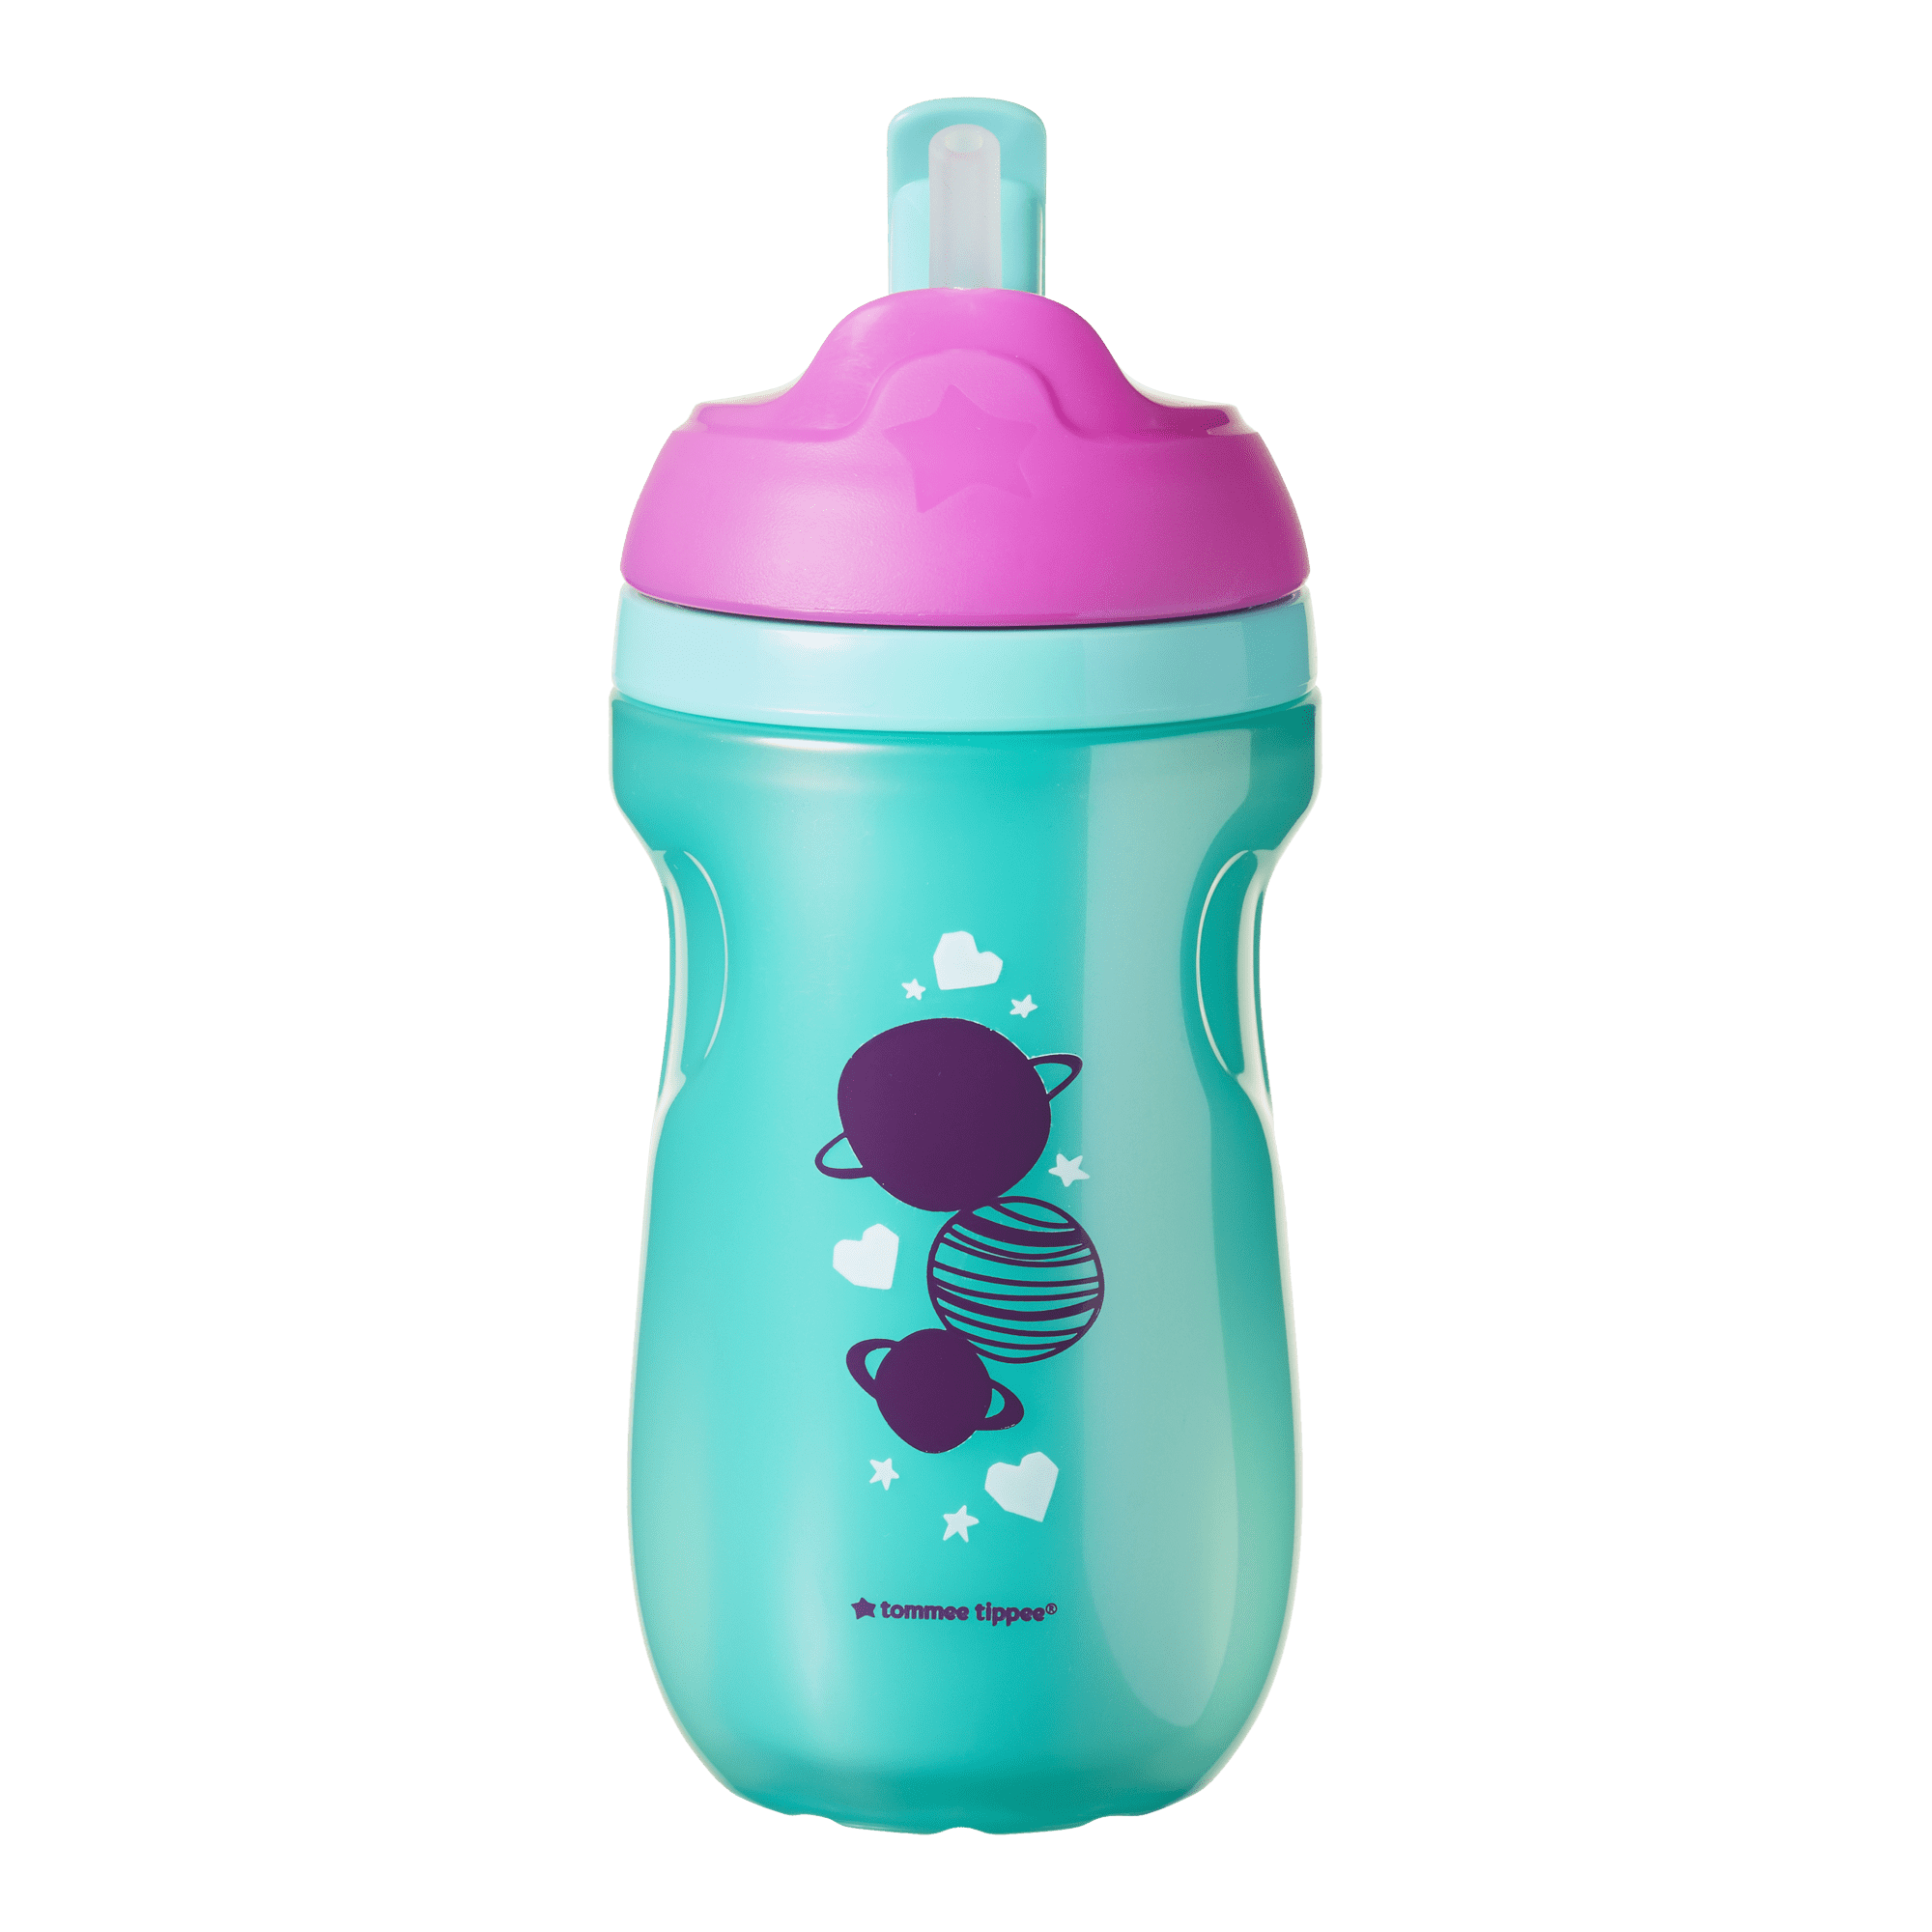 Tommee Tippee Straw Tumbler Sippy Cup, 1 ct - Kroger